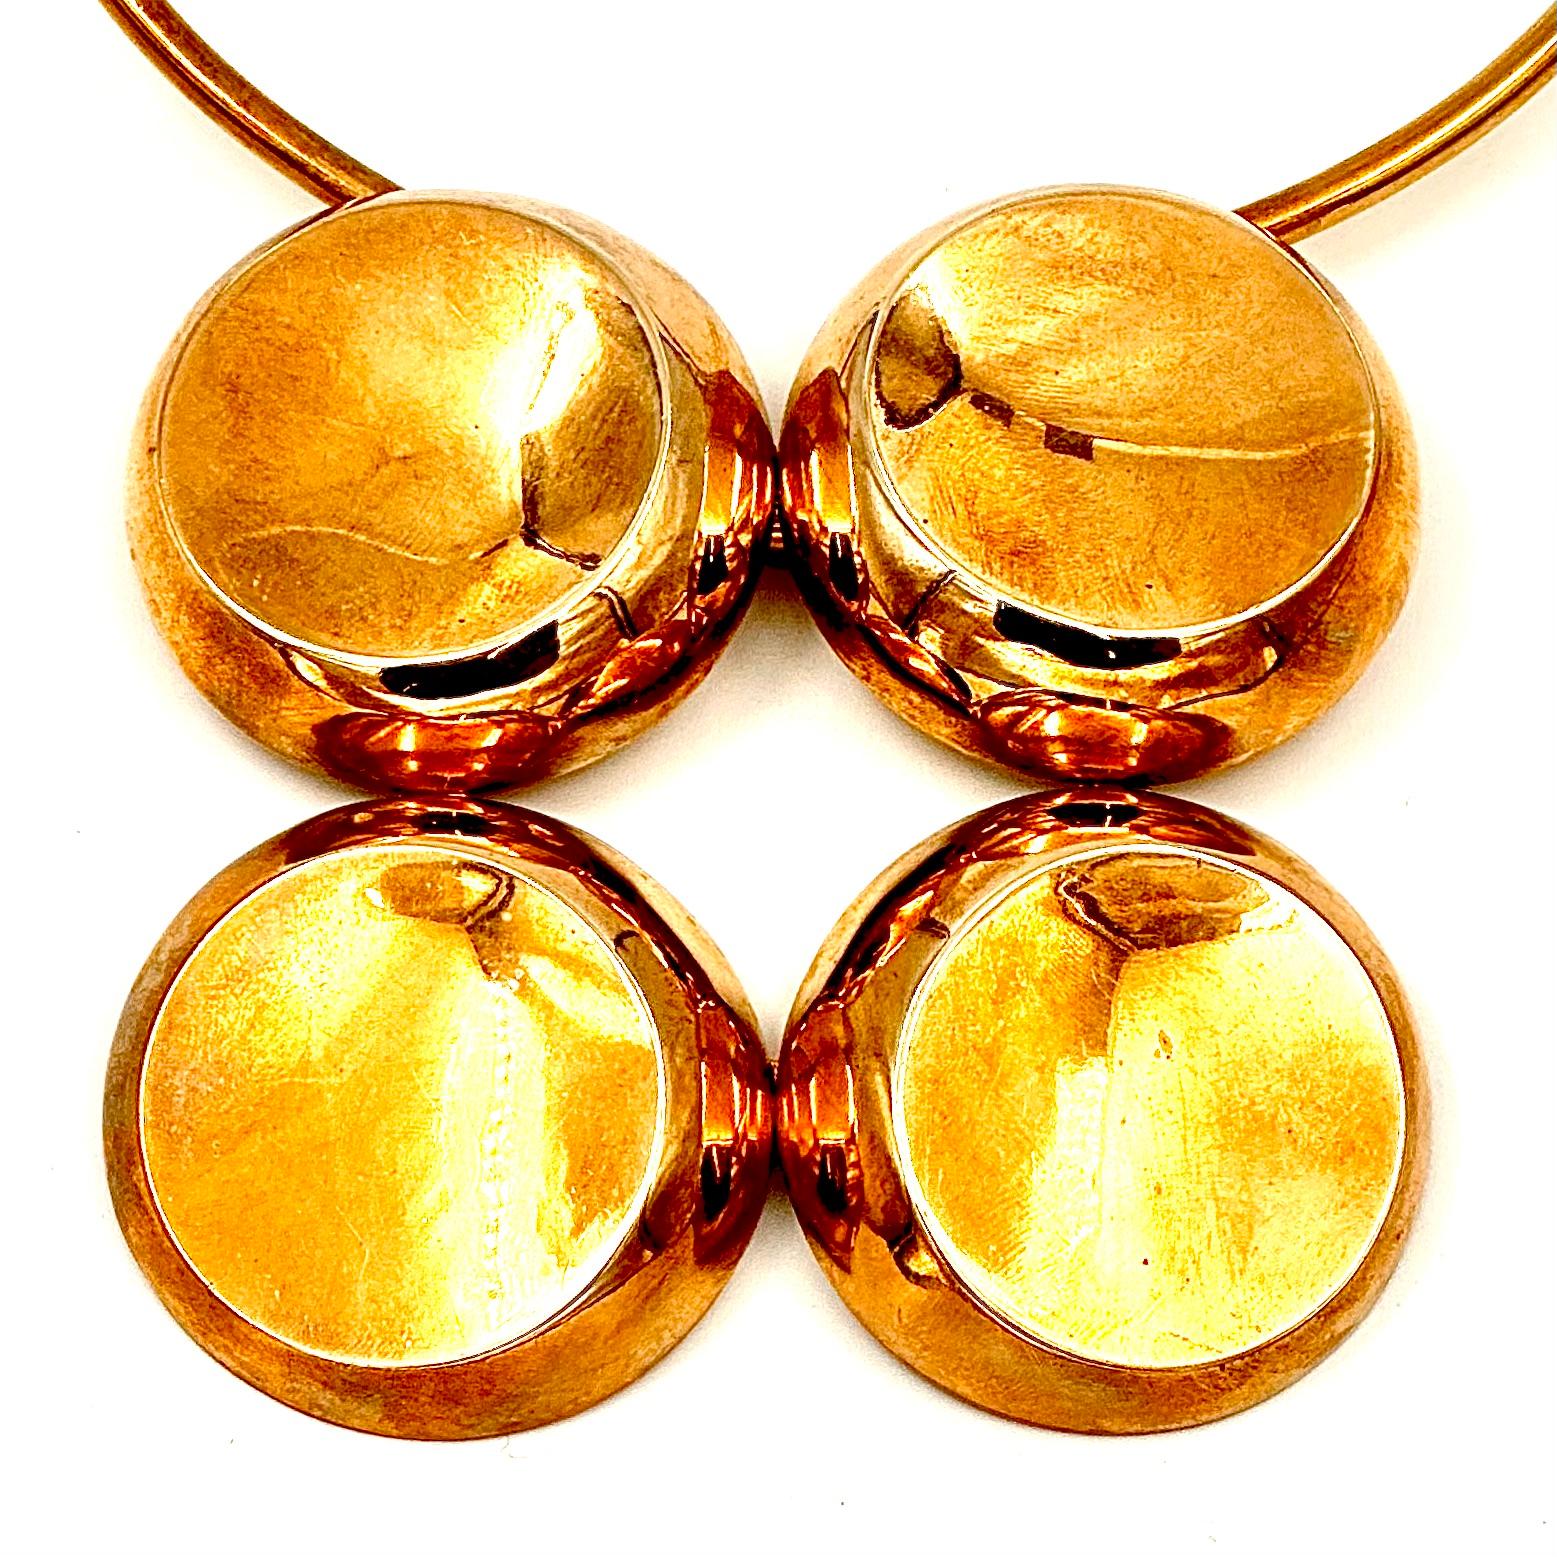 This striking and powerful statement necklace is made of polished brass. The high polish makes this look like a massive solid gold necklace, which is the ultimate fashion jewelry trick. Fun, Bold and commanding, the woman who wears this is a strong